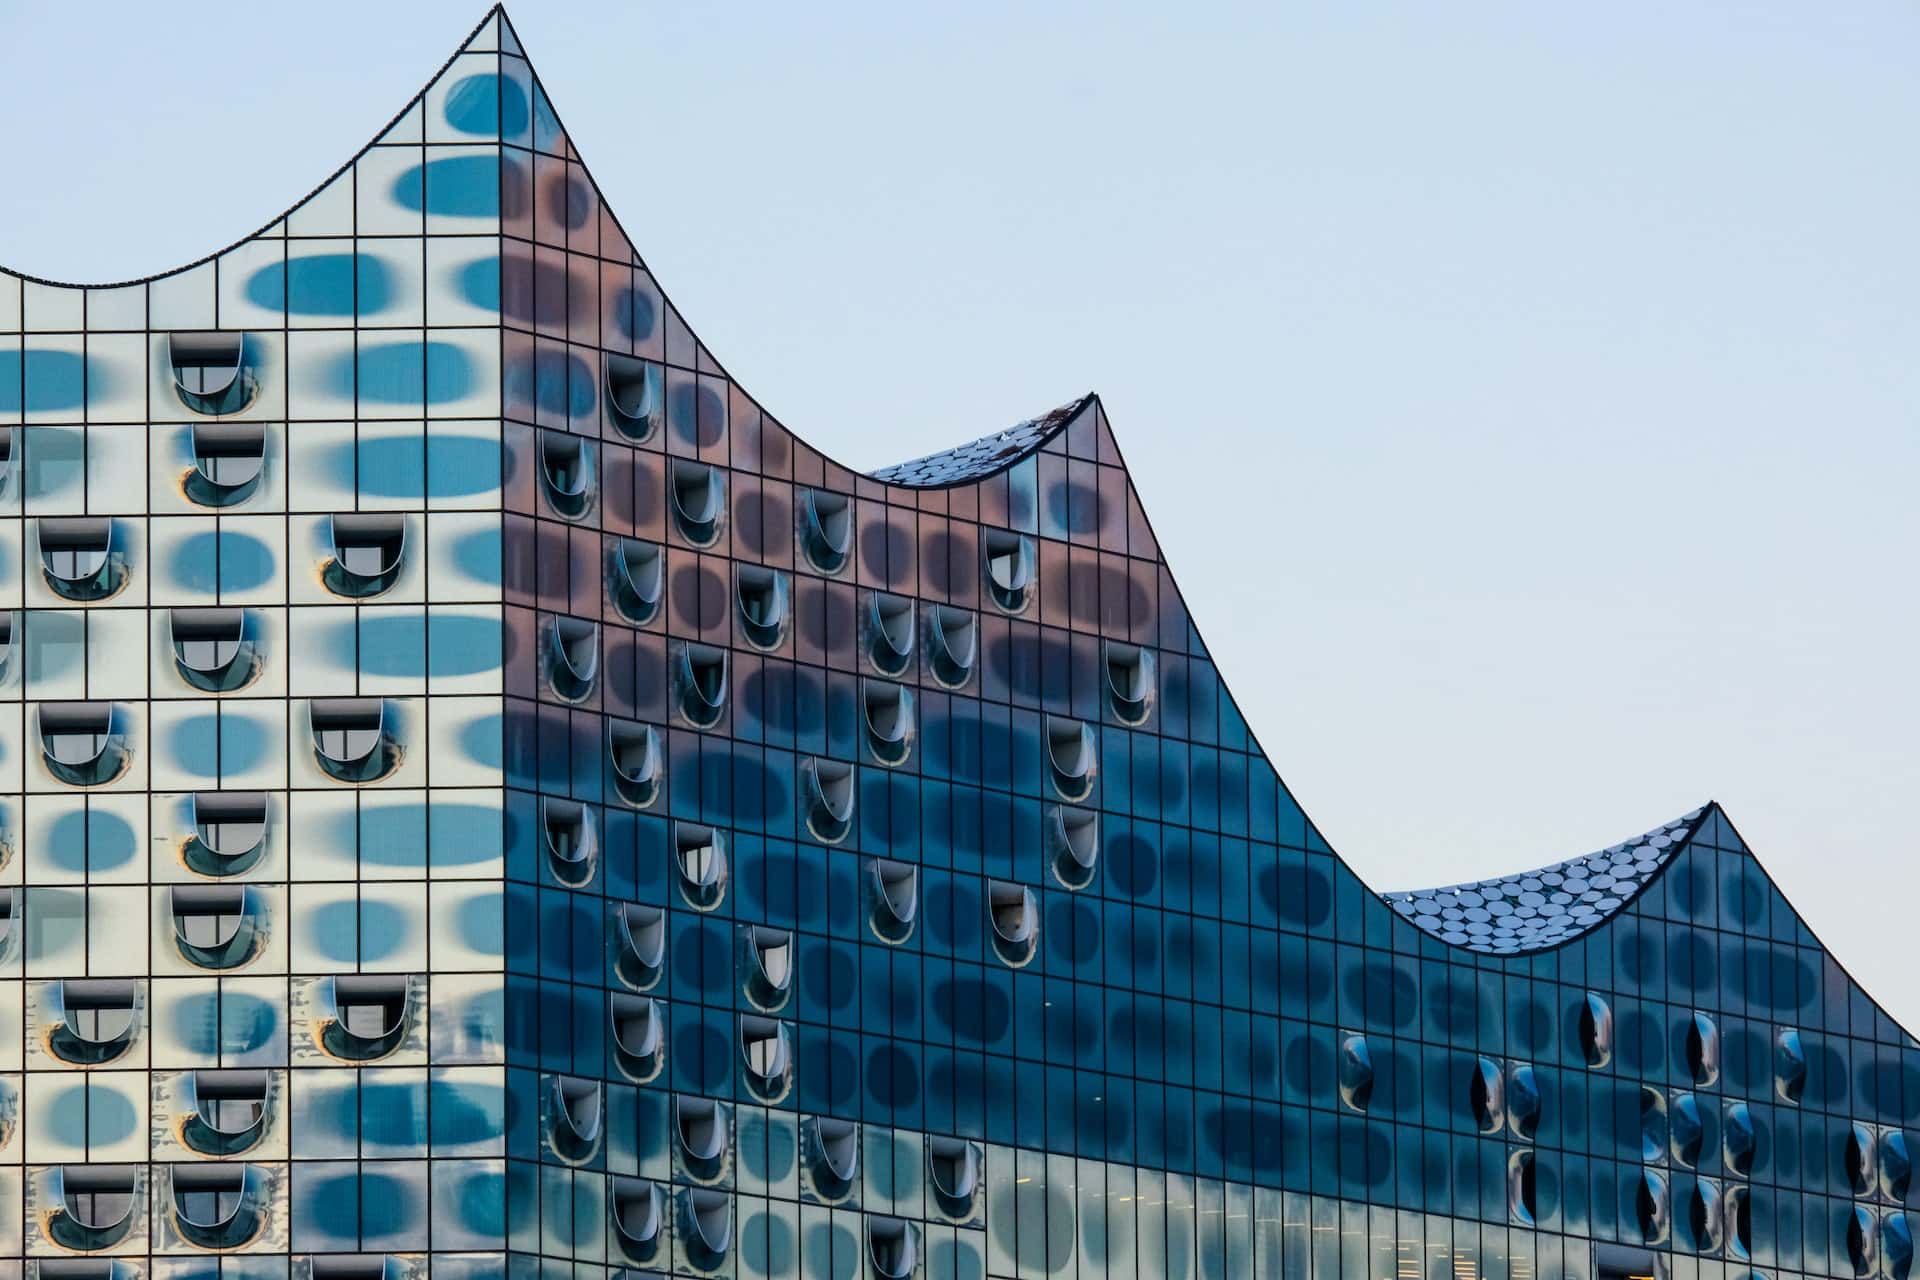 Home to the Elbphilharmonie Hamburg, HafenCity is a recently-revitalised neighbourhood filled with modern architecture